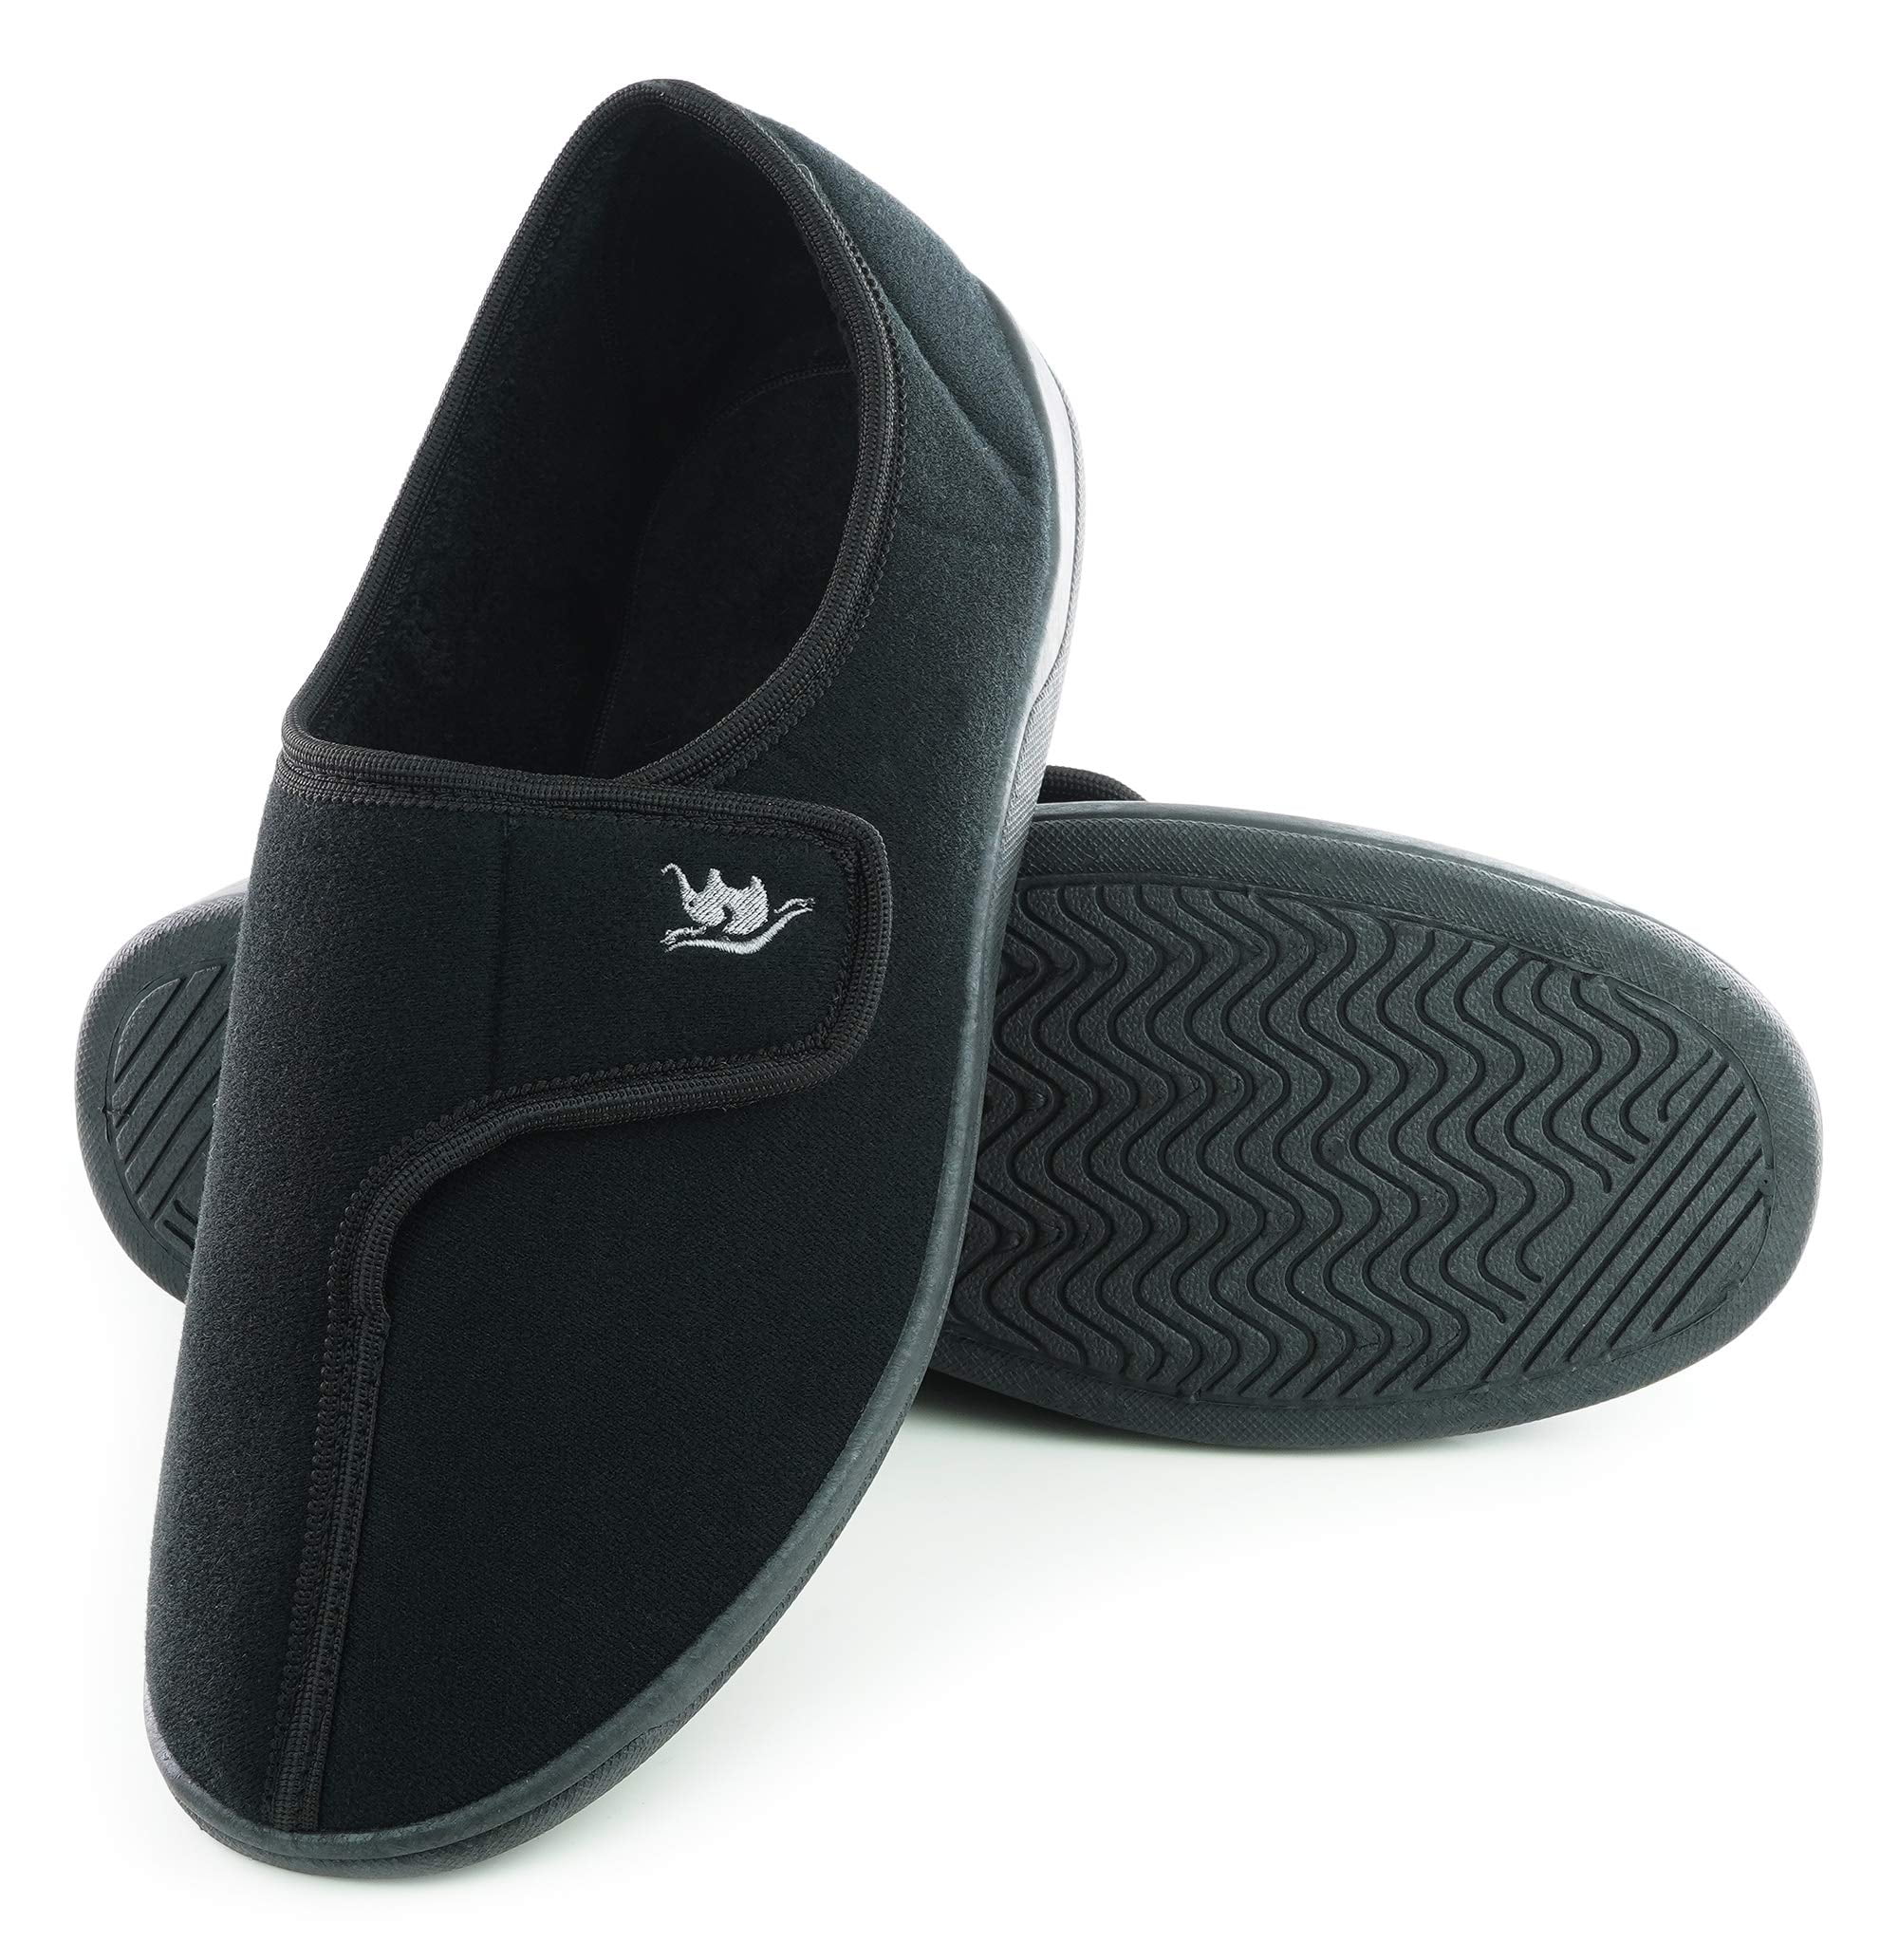 SLEEPERS 'MARTIN' Velour Single Bar Touch Fastening Slippers